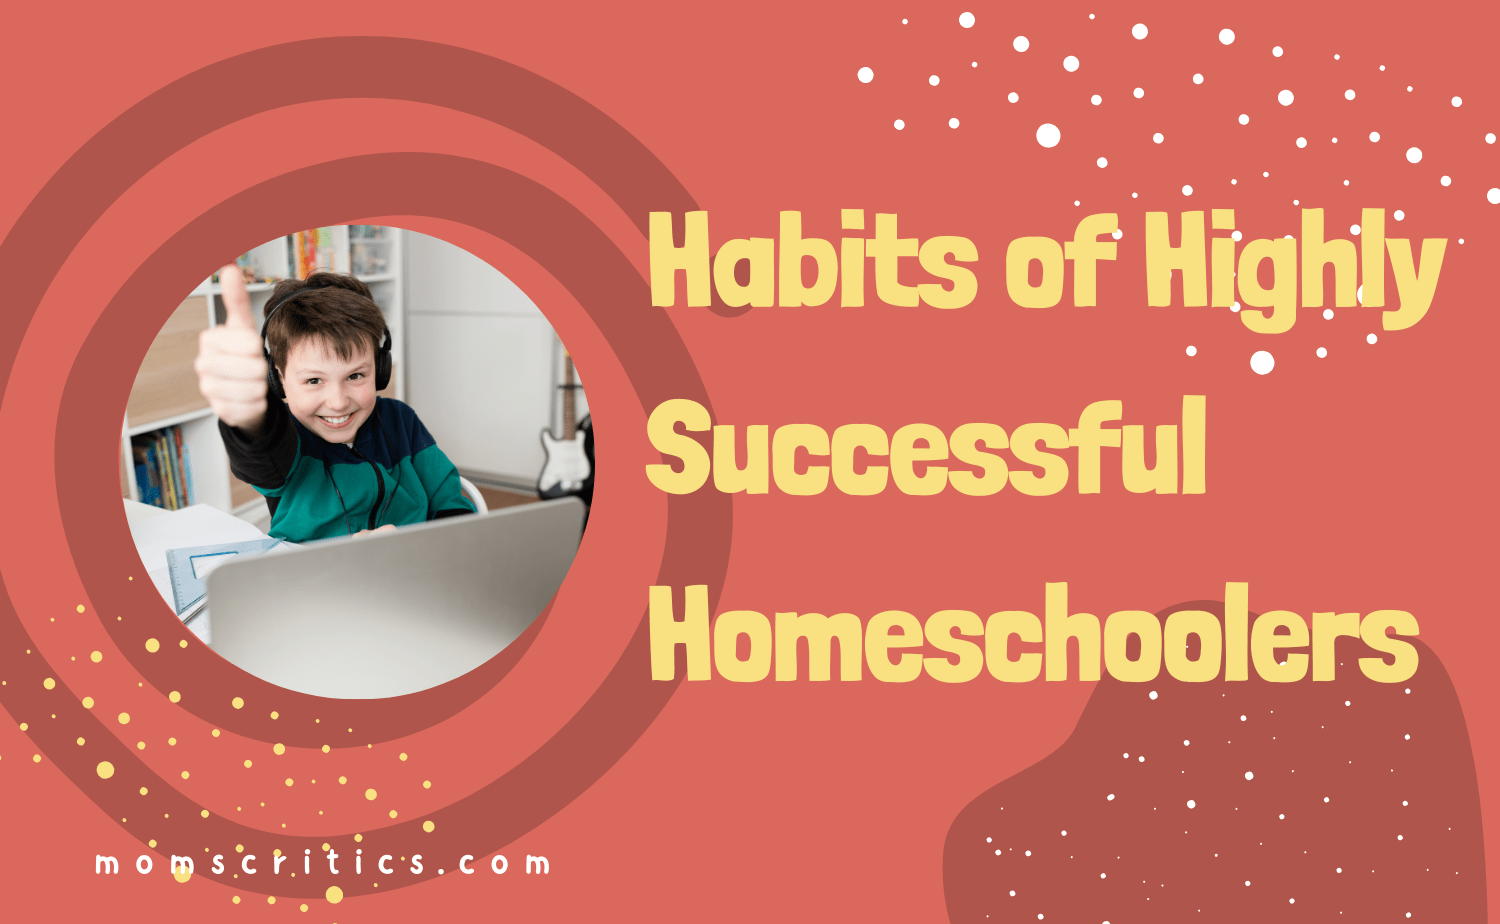 Habits of Highly Successful Homeschoolers